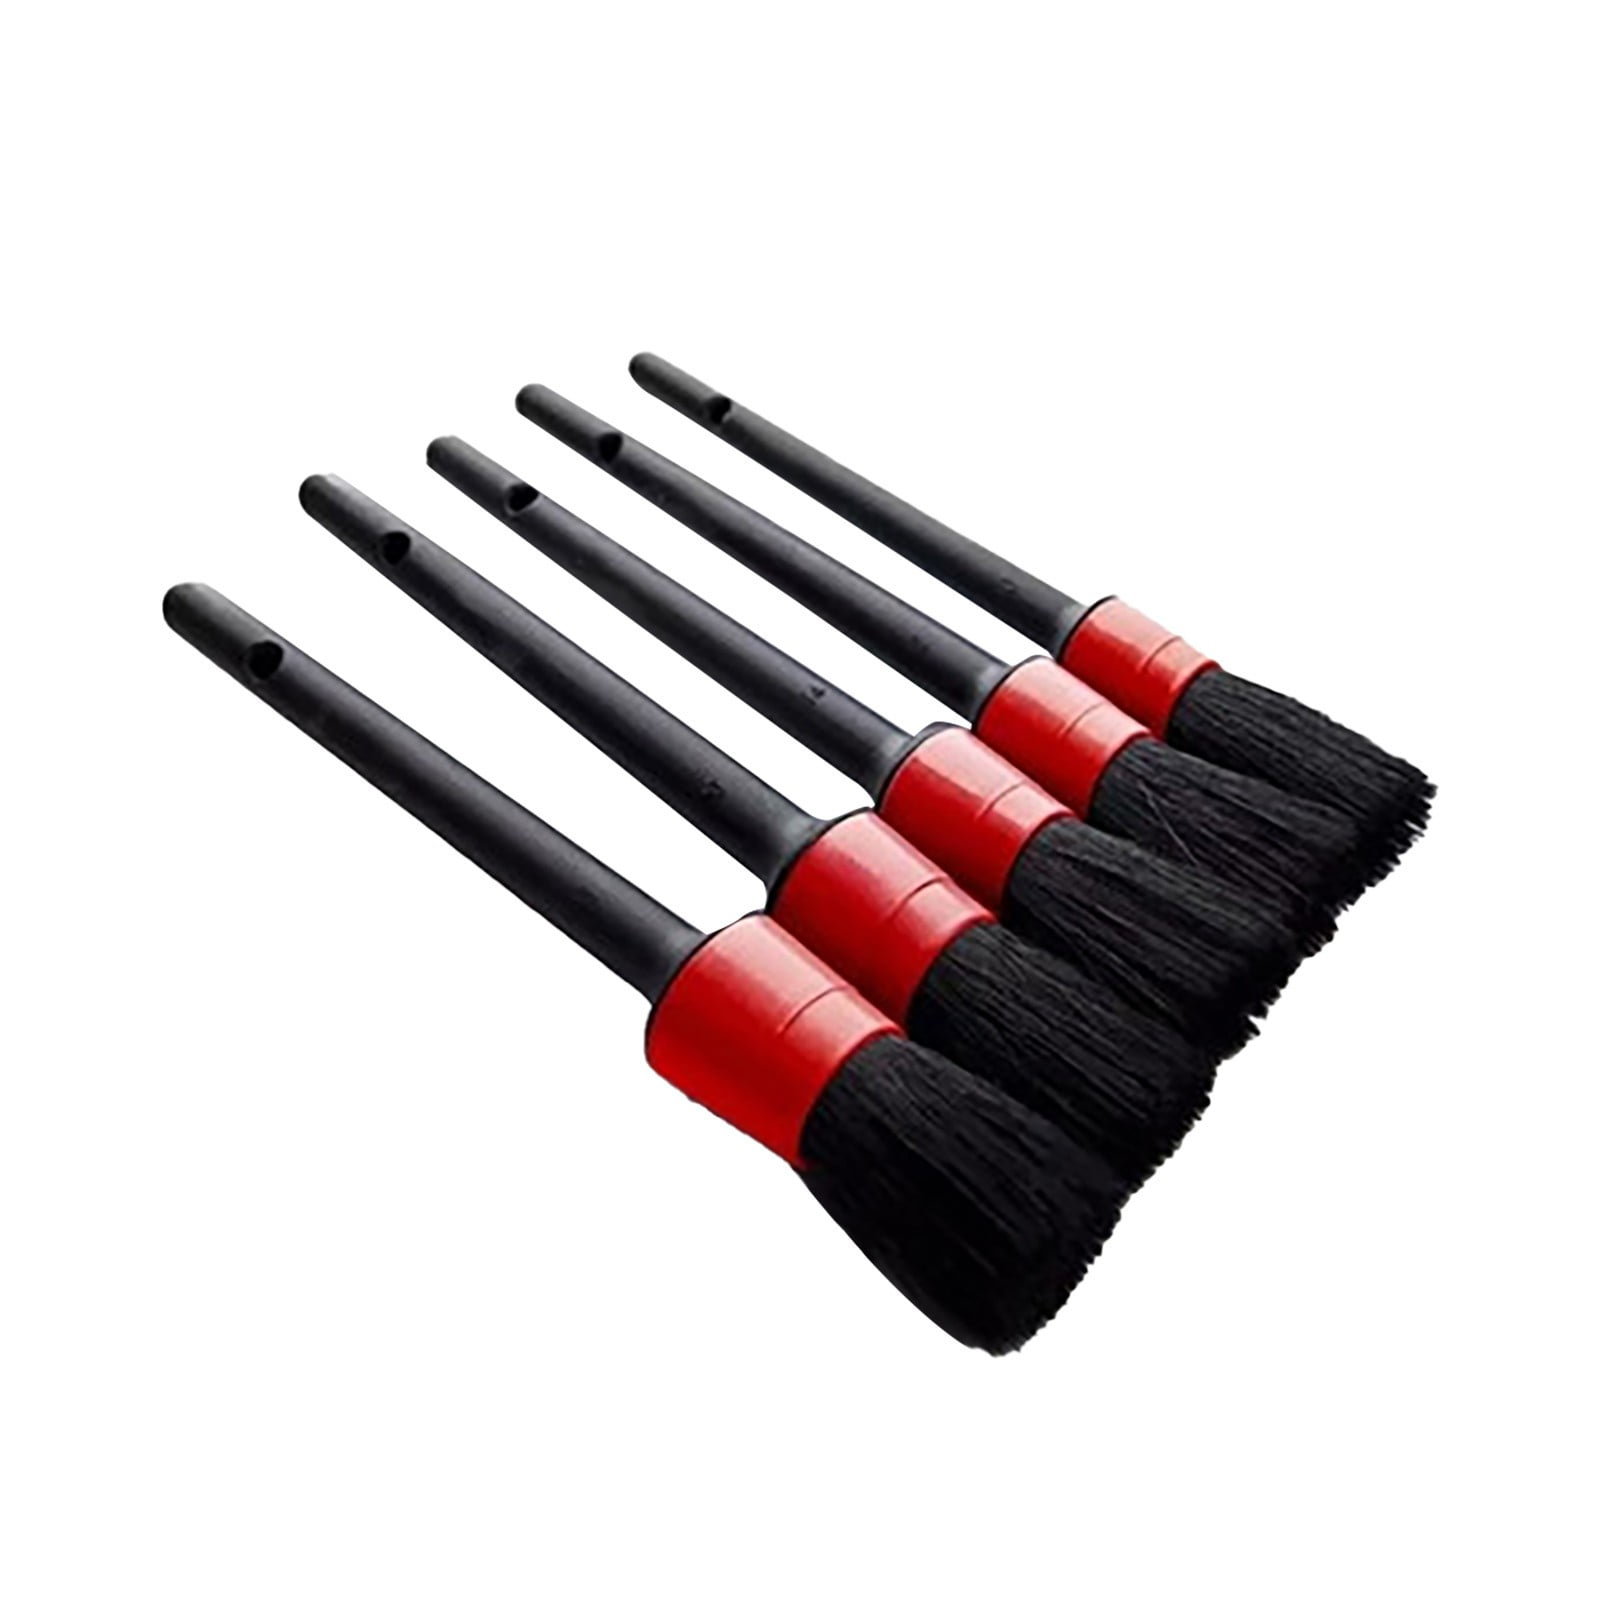 5x Detailing Brush Dry And Wet Soft Cleaning Tool Brushes Car Detail Sets 